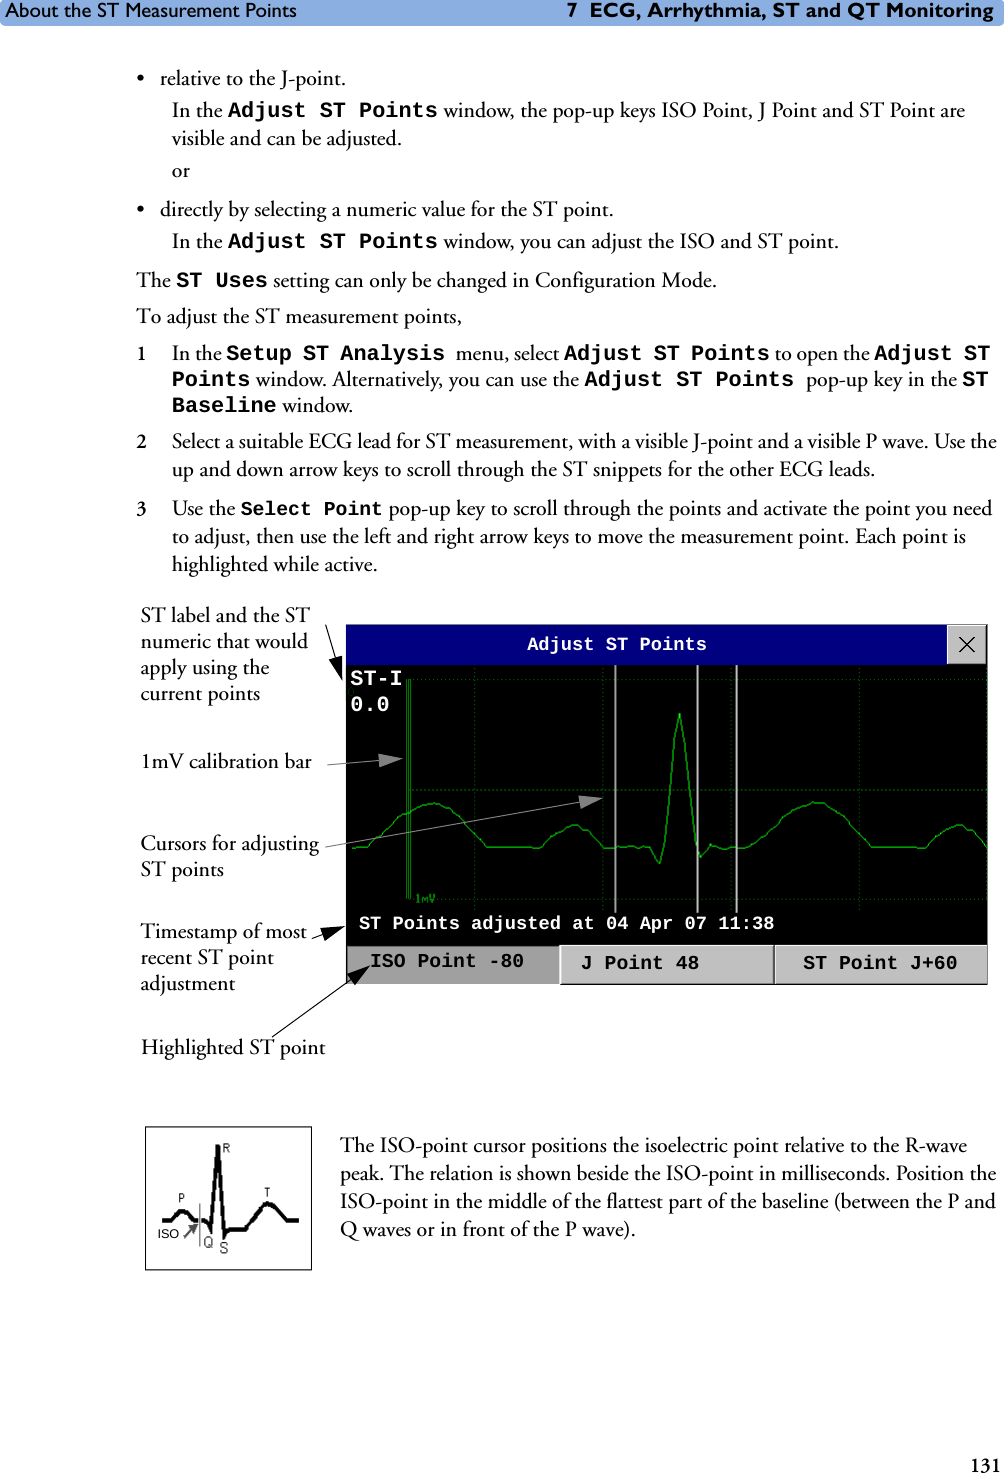 About the ST Measurement Points 7 ECG, Arrhythmia, ST and QT Monitoring131• relative to the J-point. In the Adjust ST Points window, the pop-up keys ISO Point, J Point and ST Point are visible and can be adjusted. or• directly by selecting a numeric value for the ST point. In the Adjust ST Points window, you can adjust the ISO and ST point. The ST Uses setting can only be changed in Configuration Mode. To adjust the ST measurement points, 1In the Setup ST Analysis menu, select Adjust ST Points to open the Adjust ST Points window. Alternatively, you can use the Adjust ST Points pop-up key in the ST Baseline window.2Select a suitable ECG lead for ST measurement, with a visible J-point and a visible P wave. Use the up and down arrow keys to scroll through the ST snippets for the other ECG leads. 3Use the Select Point pop-up key to scroll through the points and activate the point you need to adjust, then use the left and right arrow keys to move the measurement point. Each point is highlighted while active. The ISO-point cursor positions the isoelectric point relative to the R-wave peak. The relation is shown beside the ISO-point in milliseconds. Position the ISO-point in the middle of the flattest part of the baseline (between the P and Q waves or in front of the P wave). 1mV calibration barHighlighted ST pointTimestamp of most recent ST point adjustmentST-I0.0ST label and the ST numeric that would apply using the current pointsAdjust ST PointsISO Point -80 J Point 48  ST Point J+60ST Points adjusted at 04 Apr 07 11:38Cursors for adjusting ST pointsISO